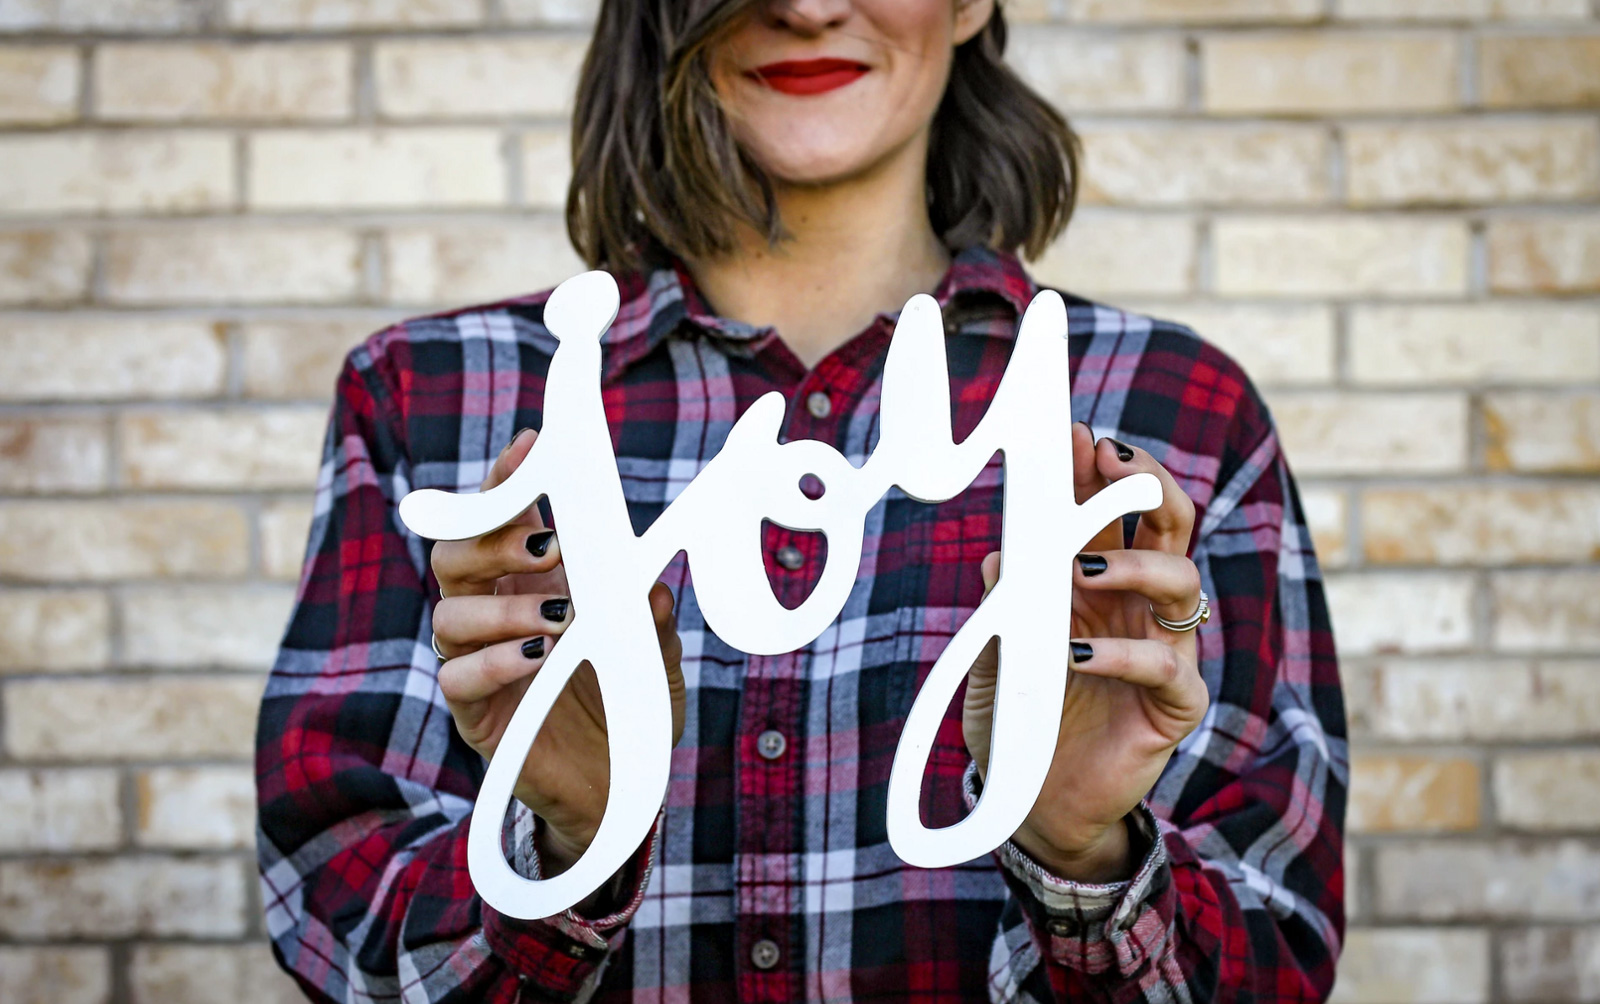 A woman smiling and holding up the word joy